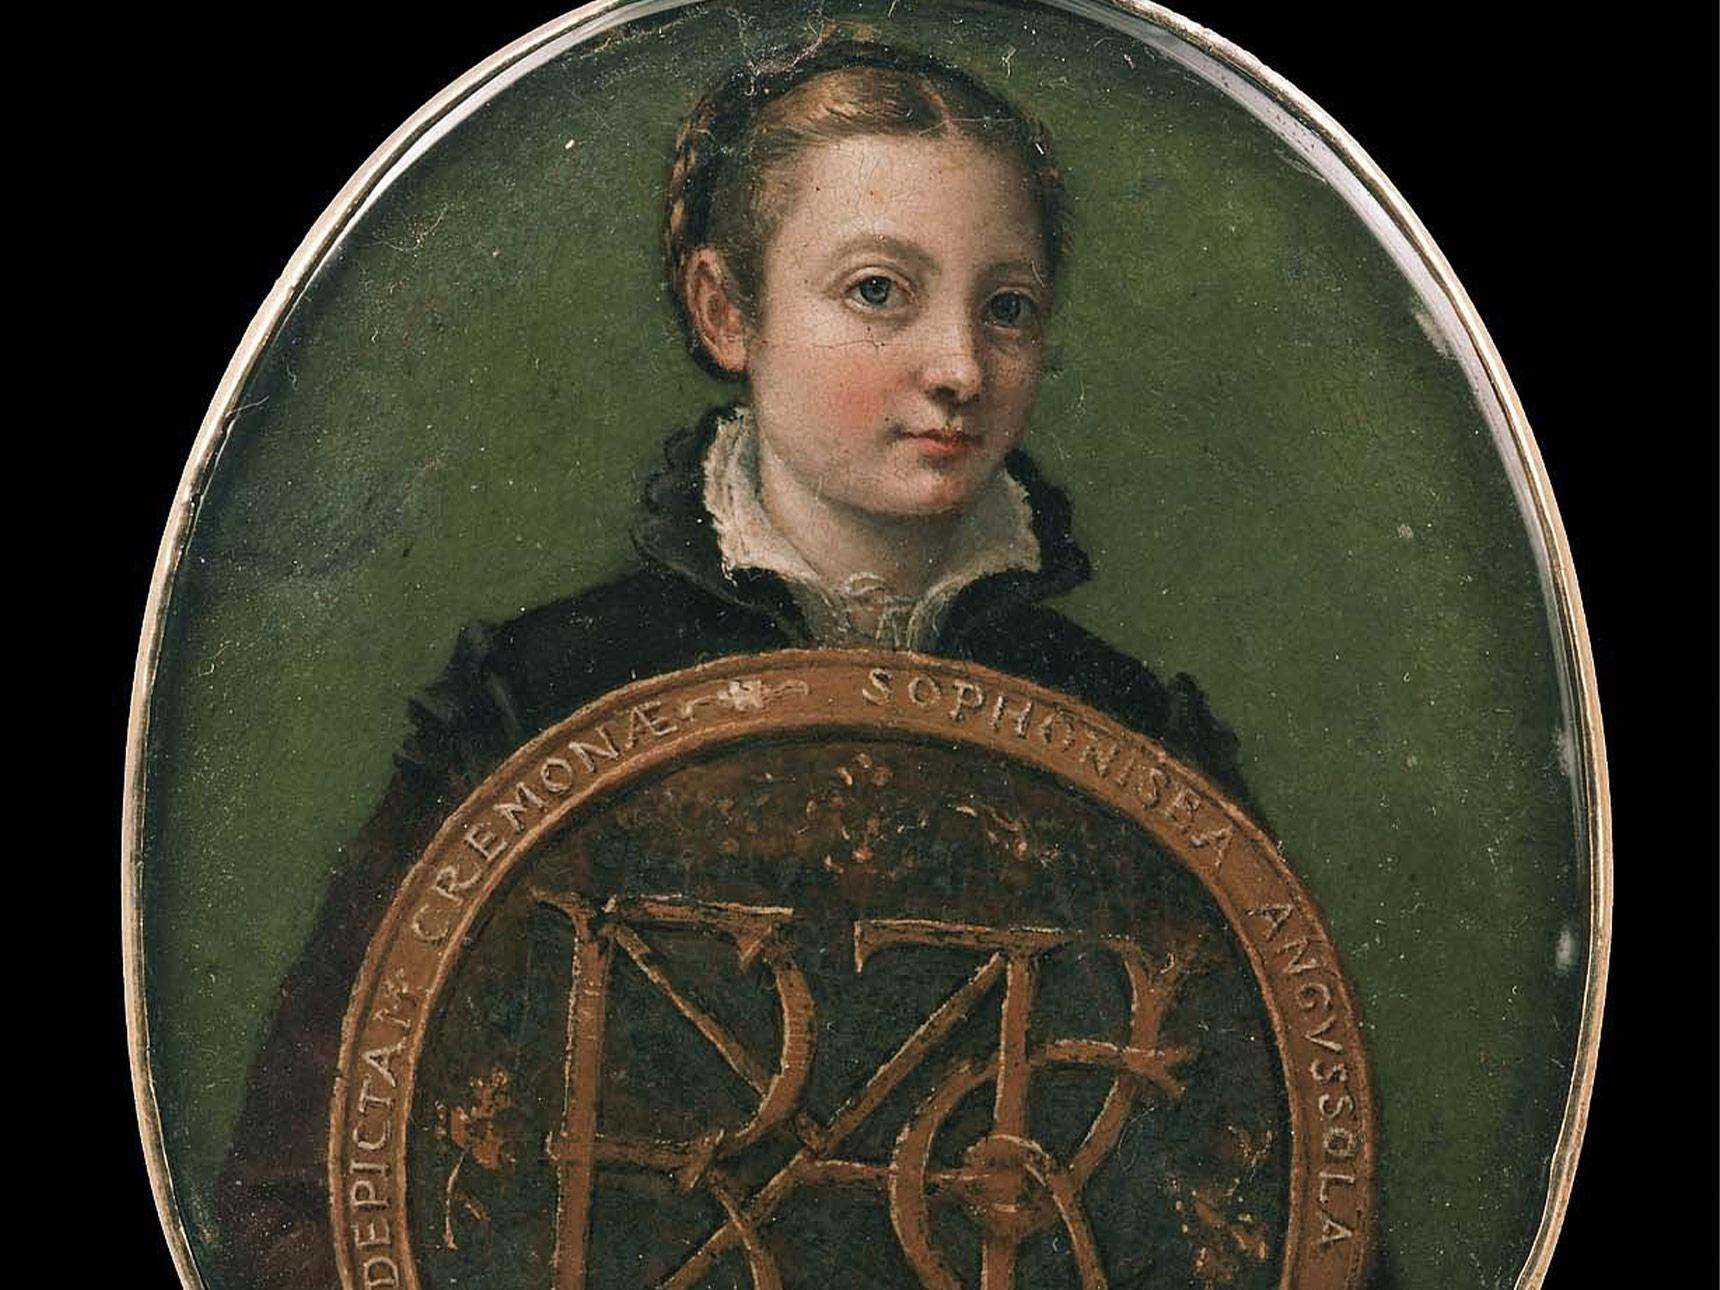 Sofonisba Anguissola, Self-Portrait (detail), about 1556. Possibly oil on parchment. Charles Potter Kling Fund and Beth Munroe Fund—Bequest of Emma F. Munroe.